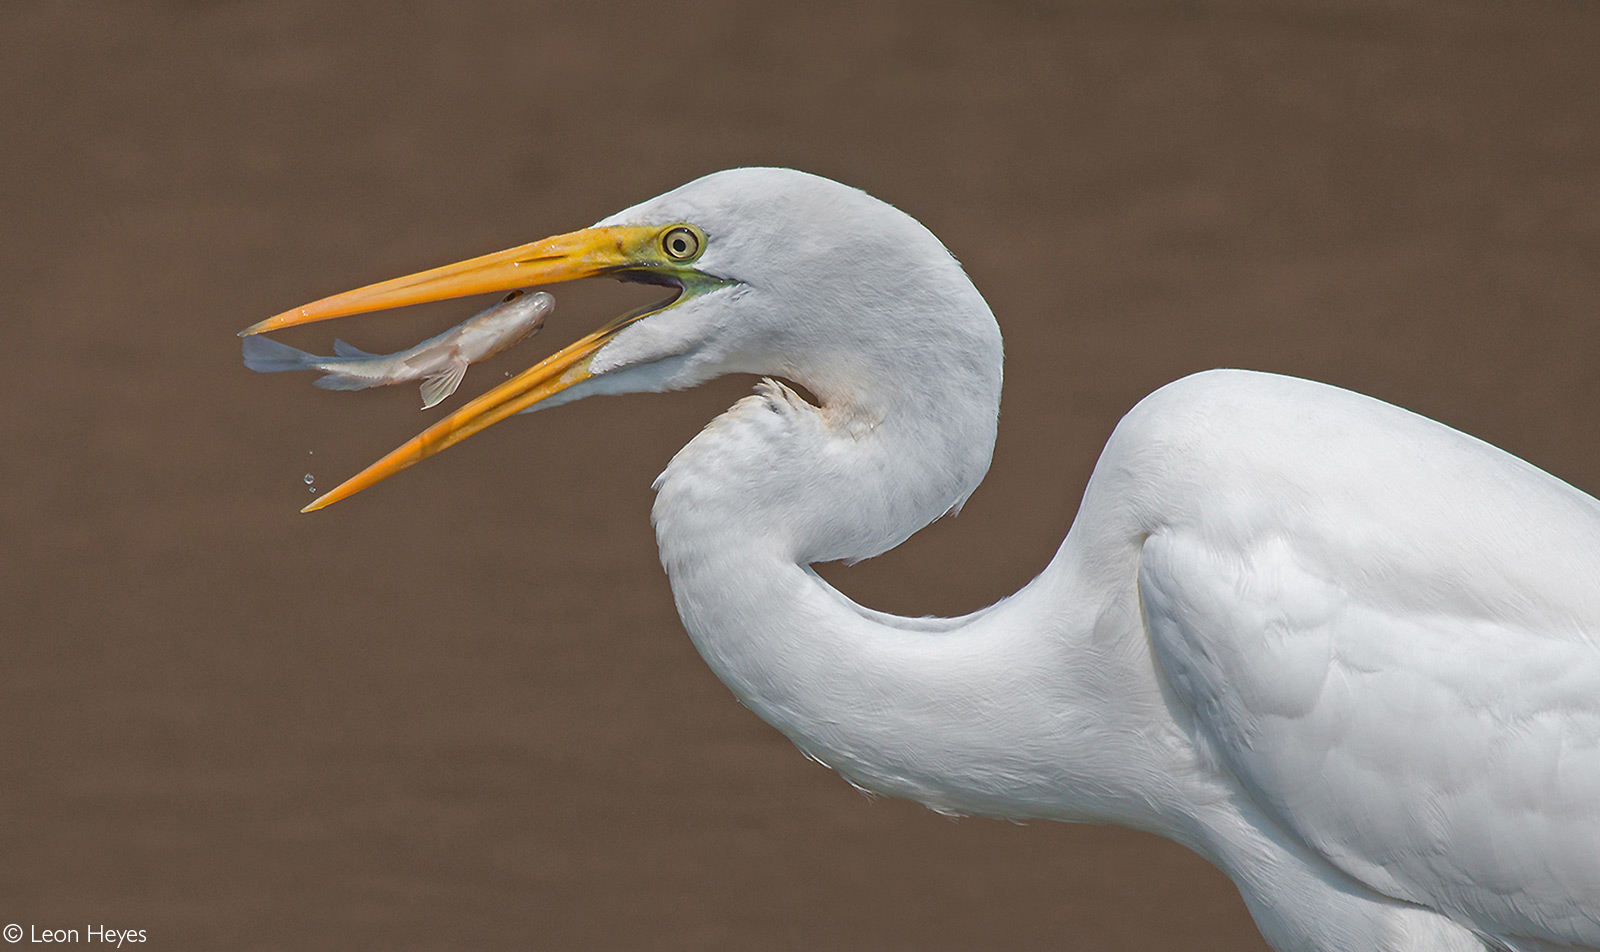 A great white egret catches his lunch at Sunset Dam. Kruger National Park, South Africa © Leon Heyes